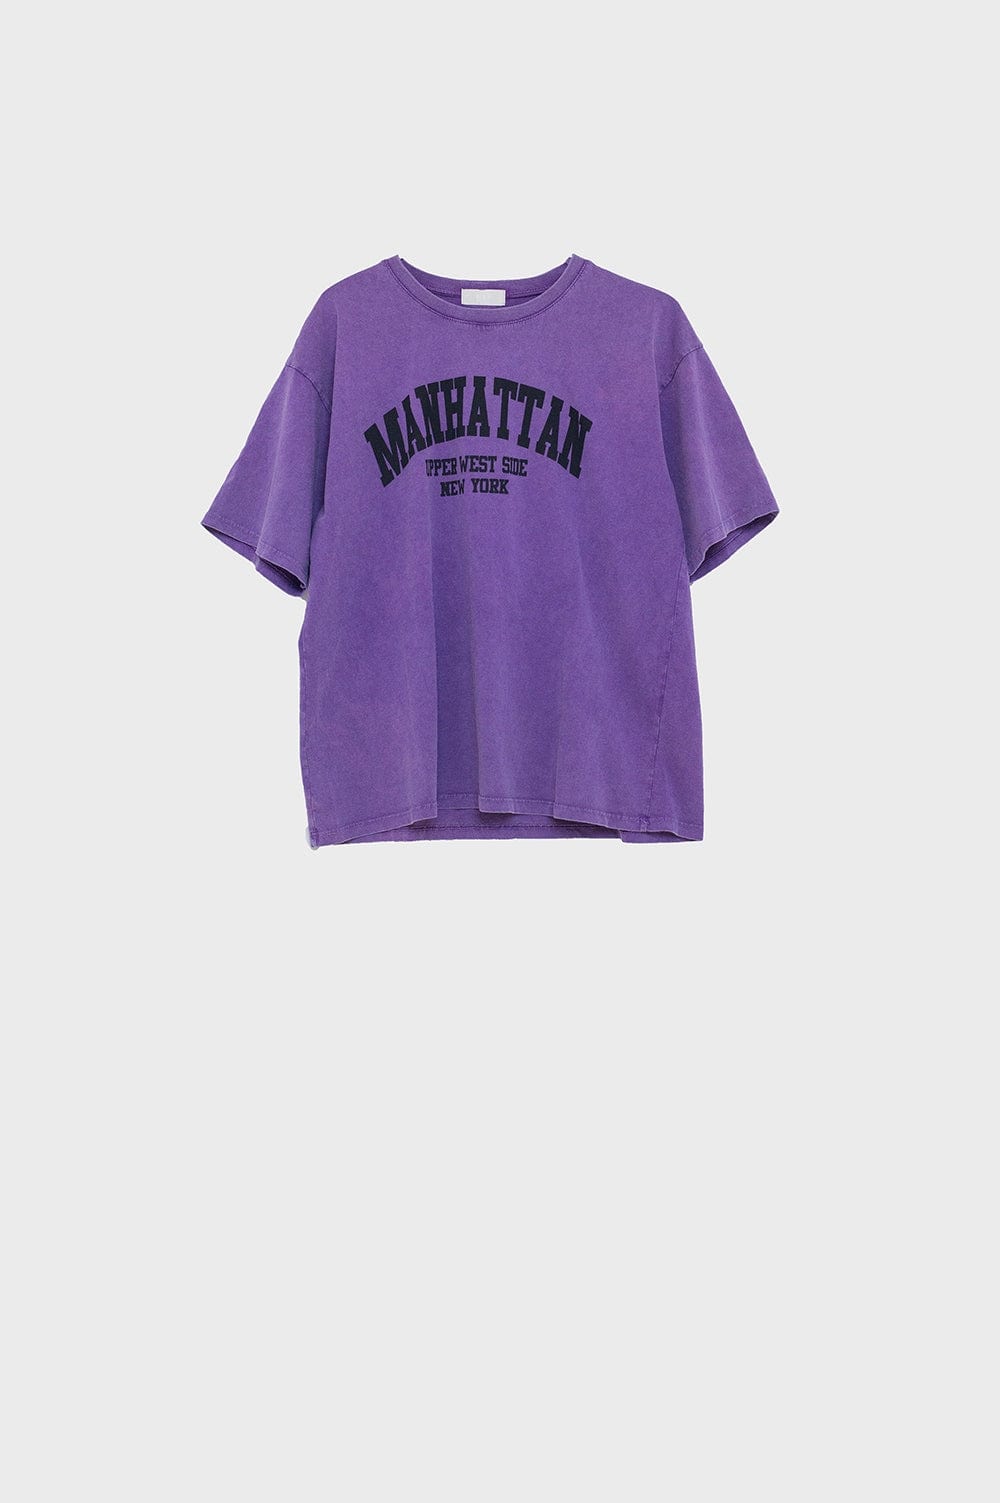 Q2 Women's Tees & Tanks One Size / Purple Purple Relaxed T-Shirt With Manhattan Text